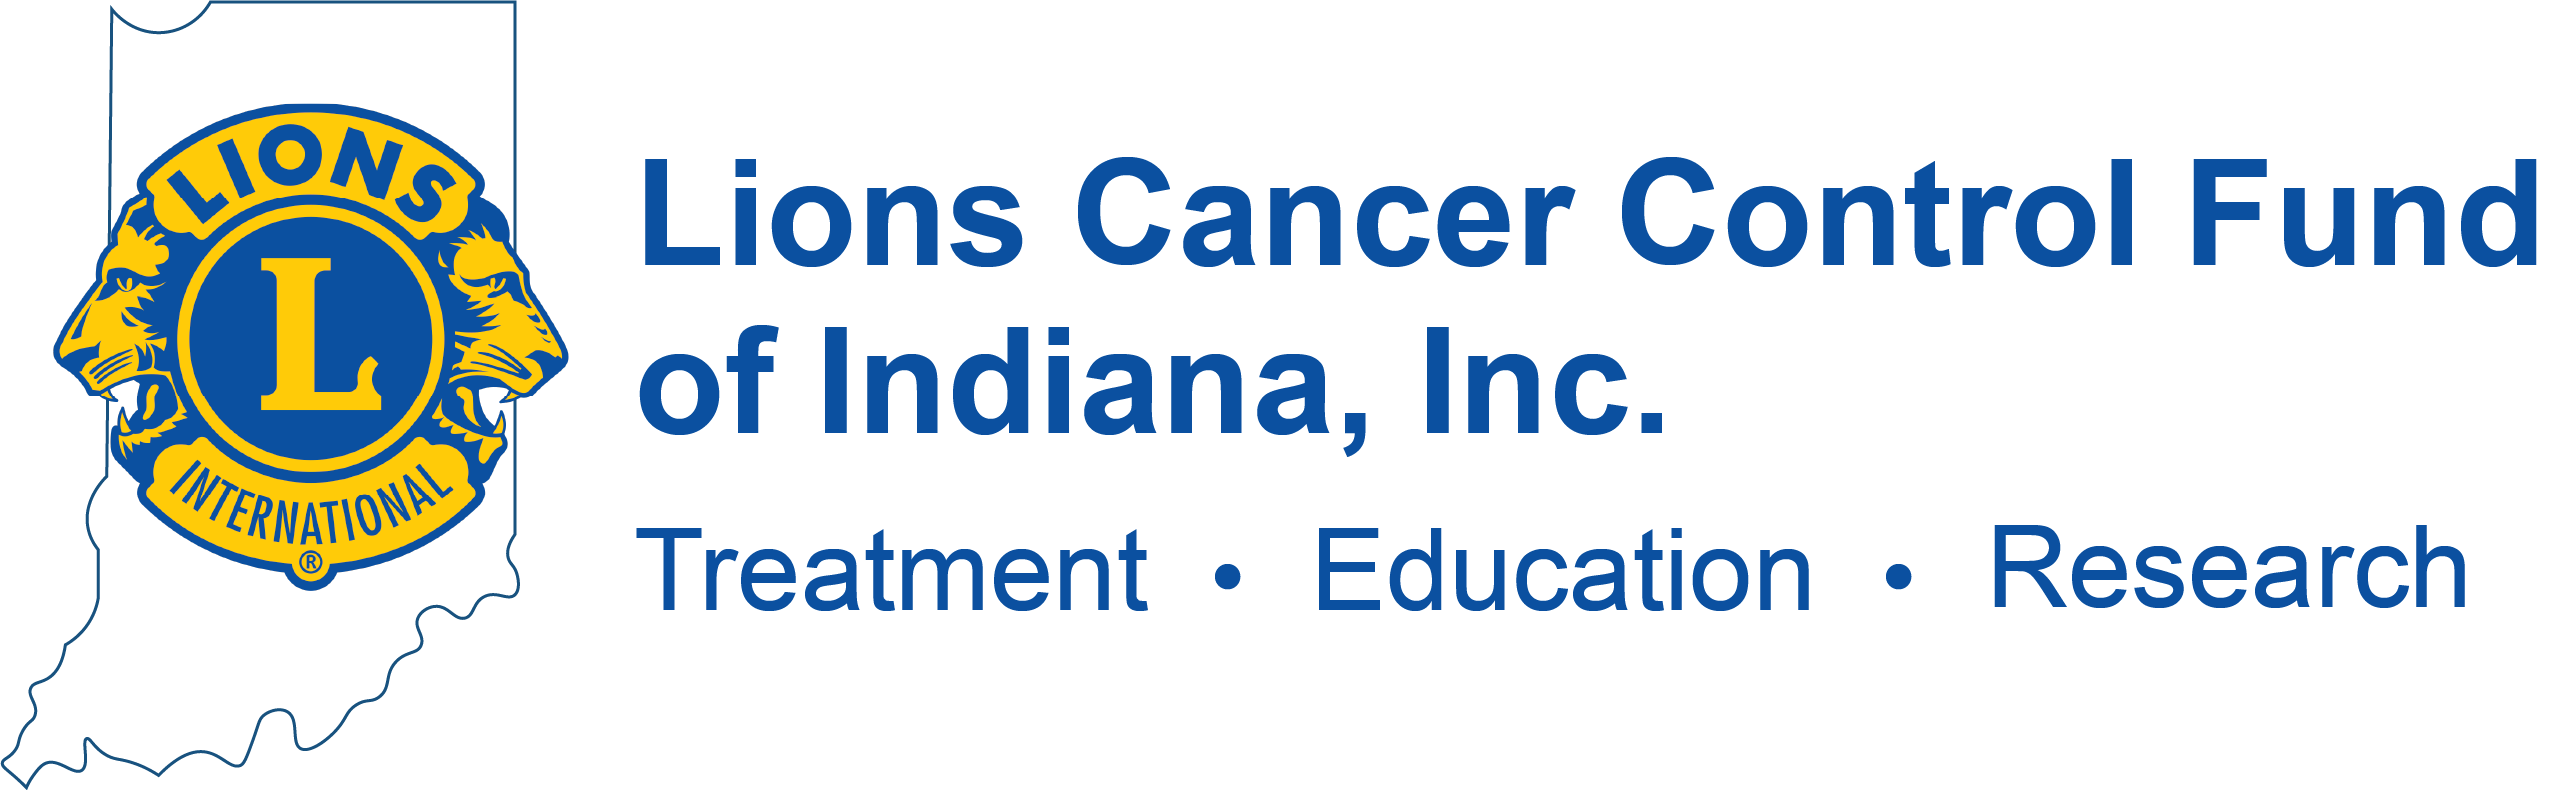 Lions Cancer Control Fund of Indiana